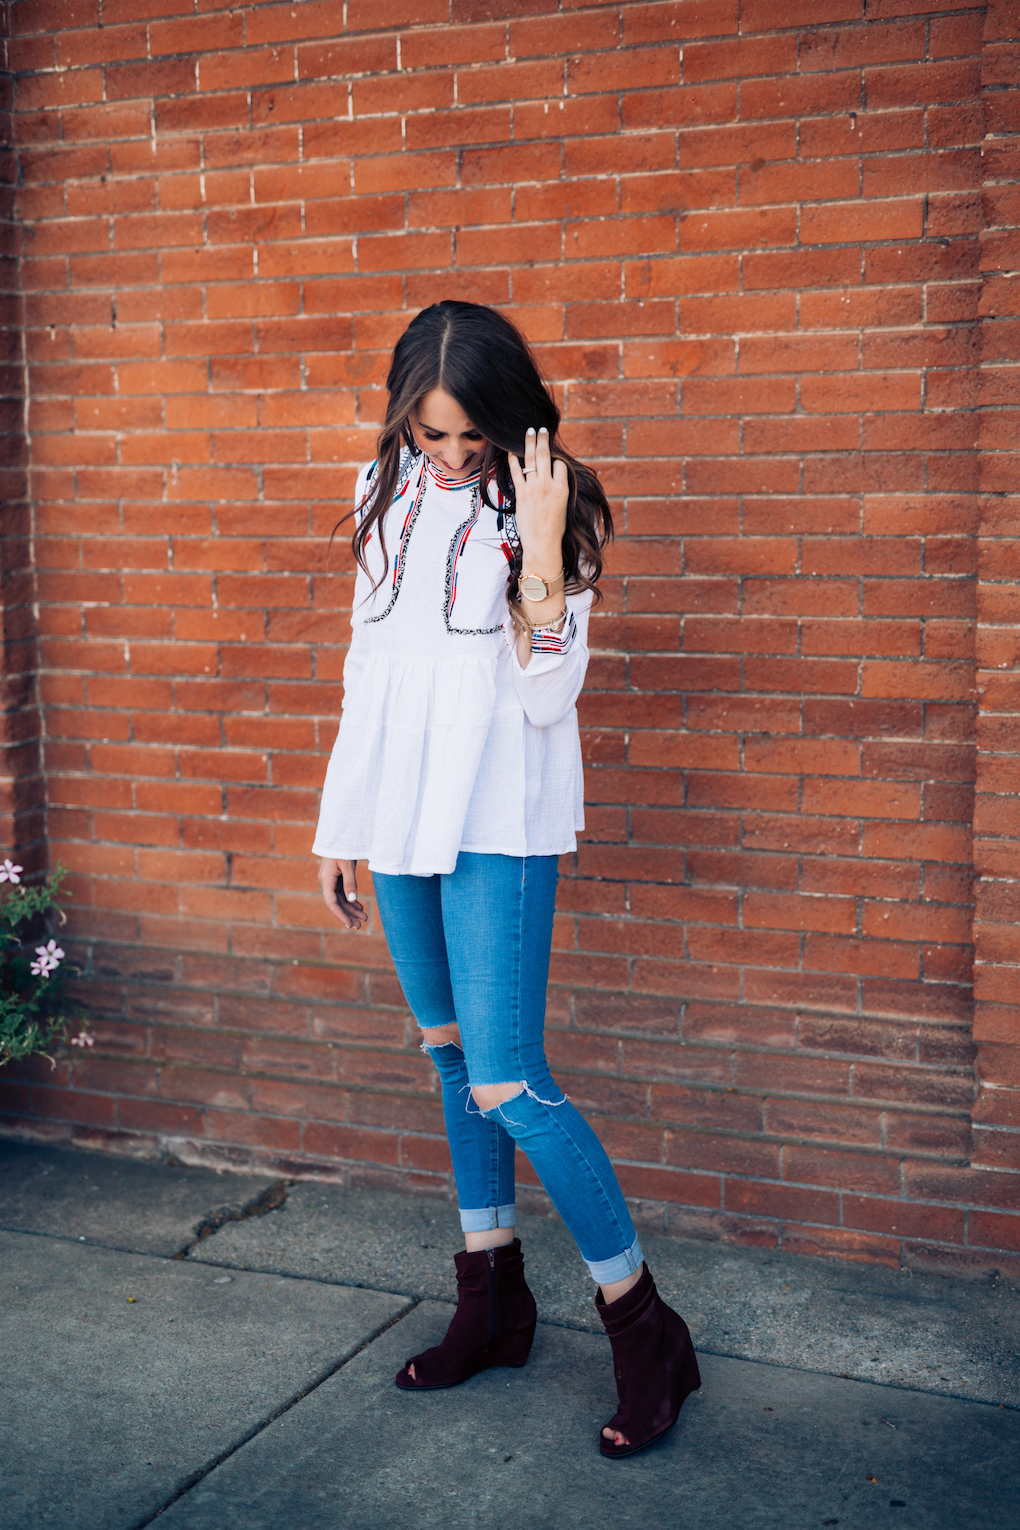 Girl in white peplum top with bright colored embroidery and skinny jeans with maroon booties 